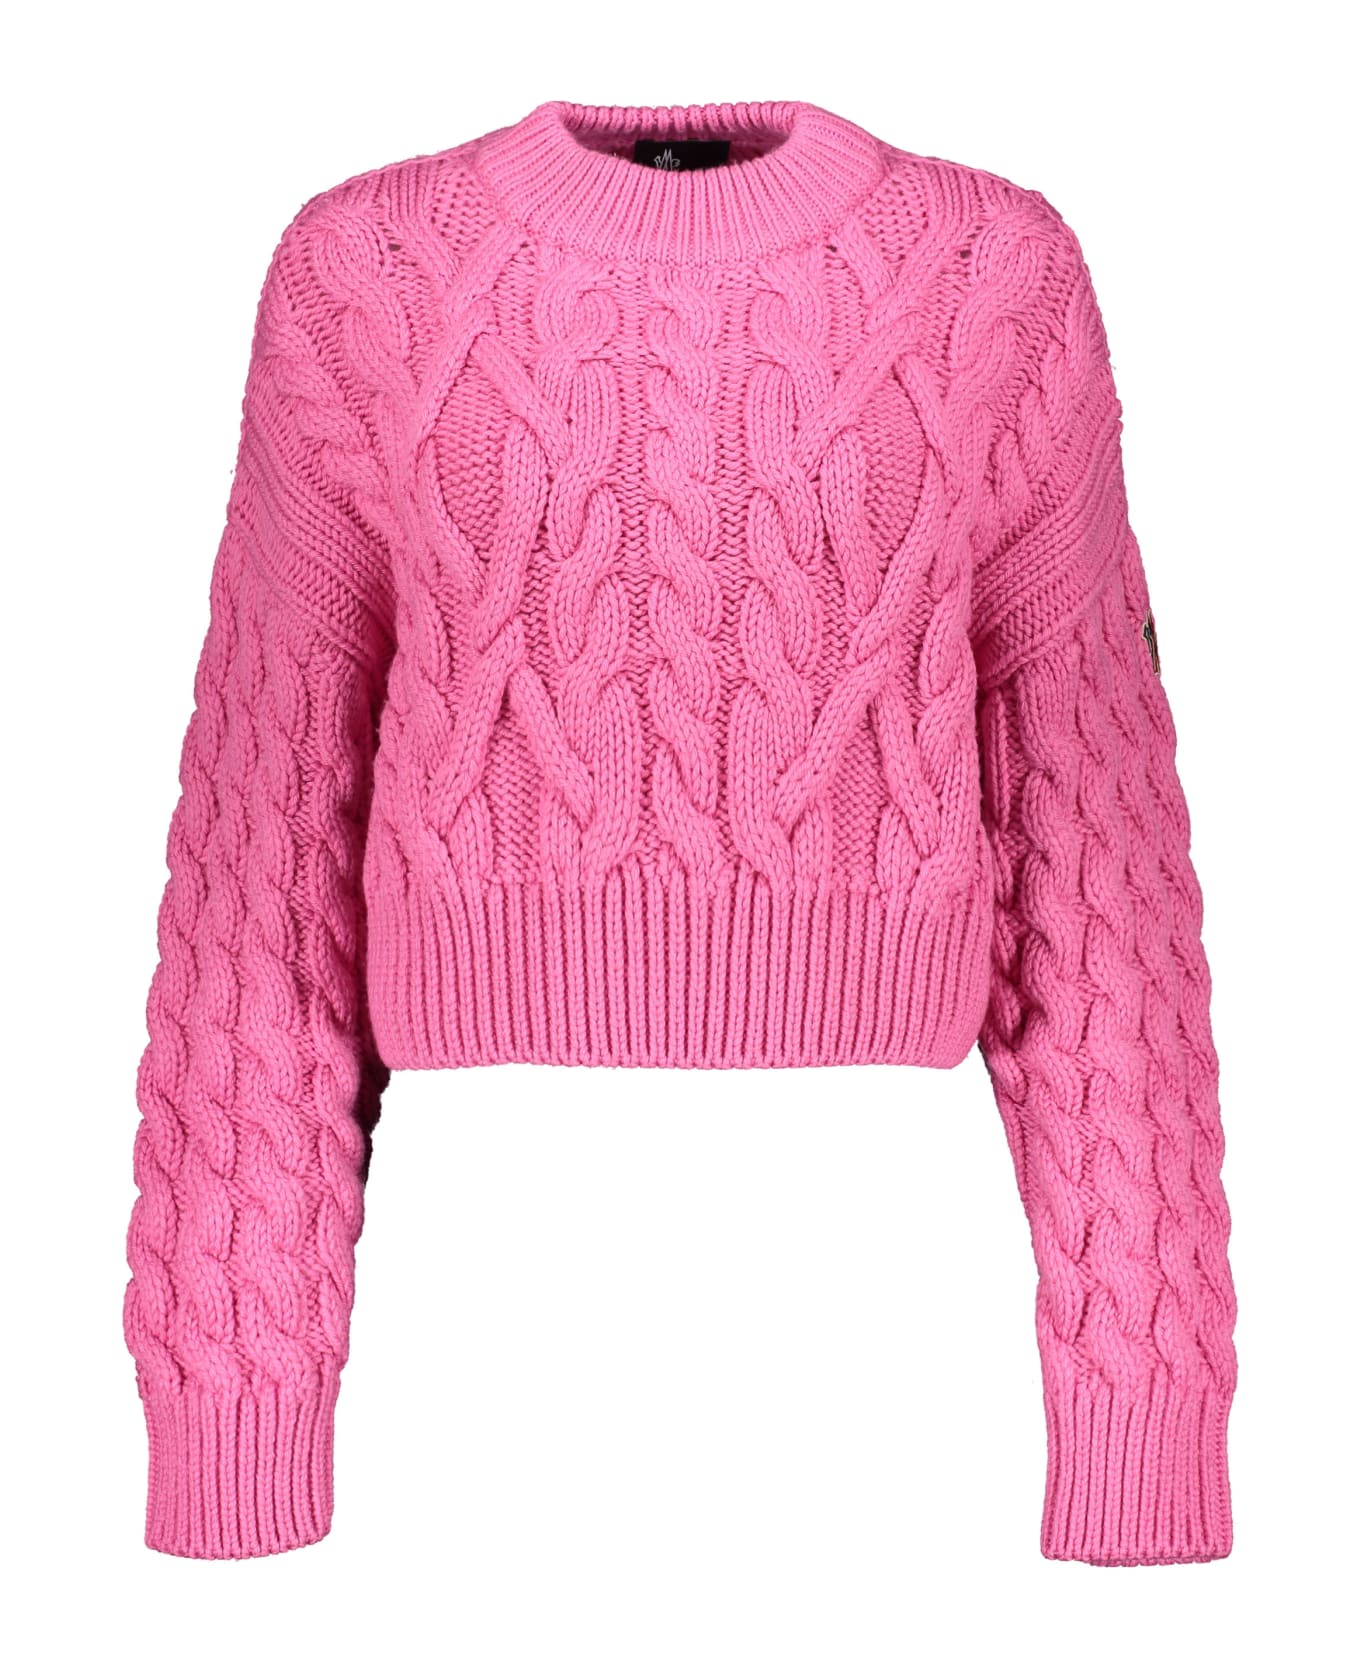 Moncler Grenoble Tricot-knit Wool Sweater - Pink